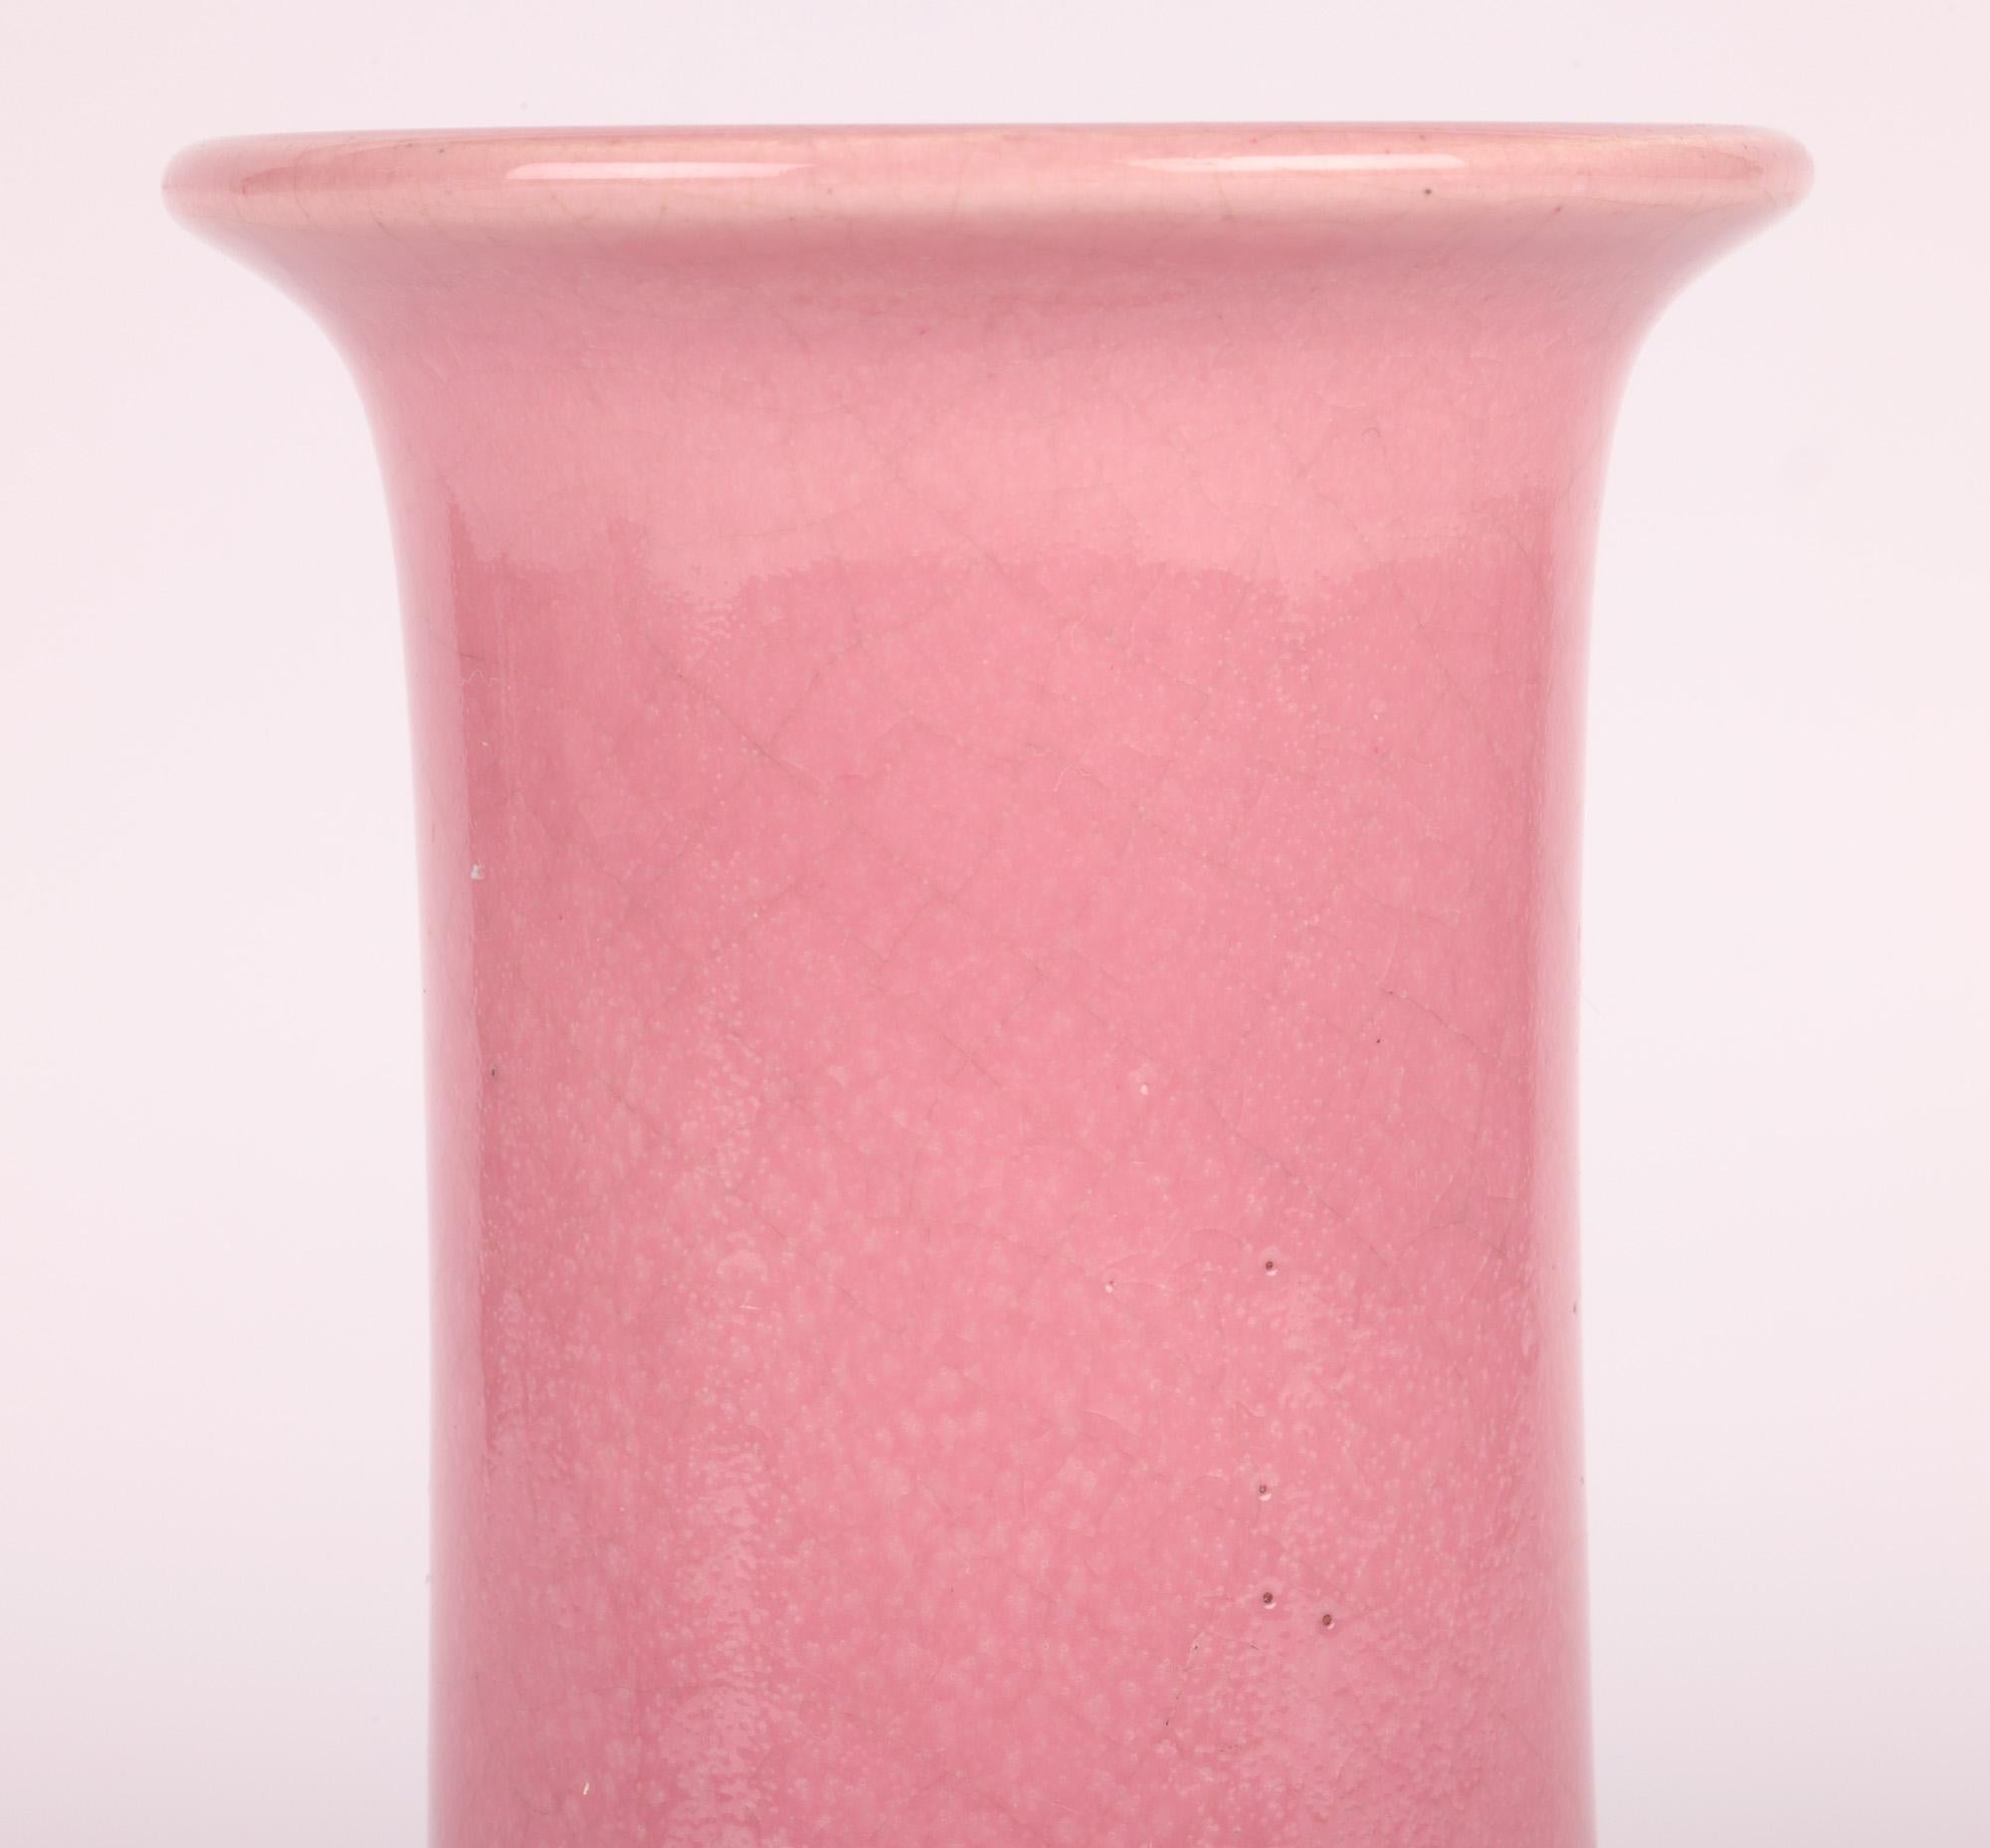 A stylish Bretby Arts & Crafts pink glazed vase in the manner of Christopher Dresser made by renowned potter Henry Tooth and dating from around 1895. 

The vase is part of a private collection of Arts and Crafts influenced pottery amassed in the mid